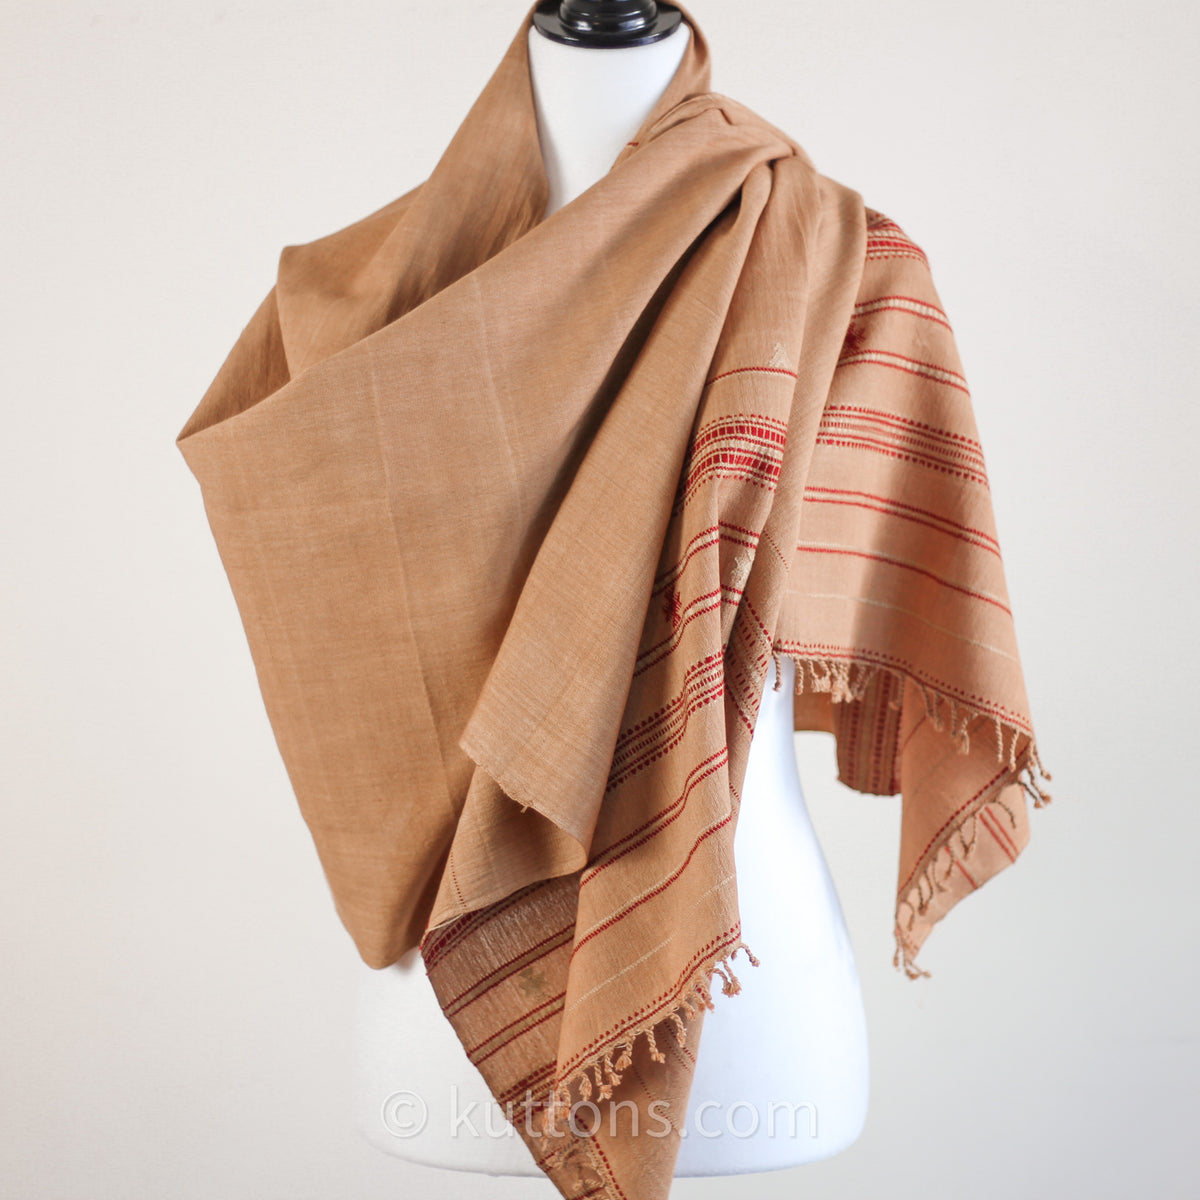 Large linen scarf Canada  Shop made in Canada pure linen scarves